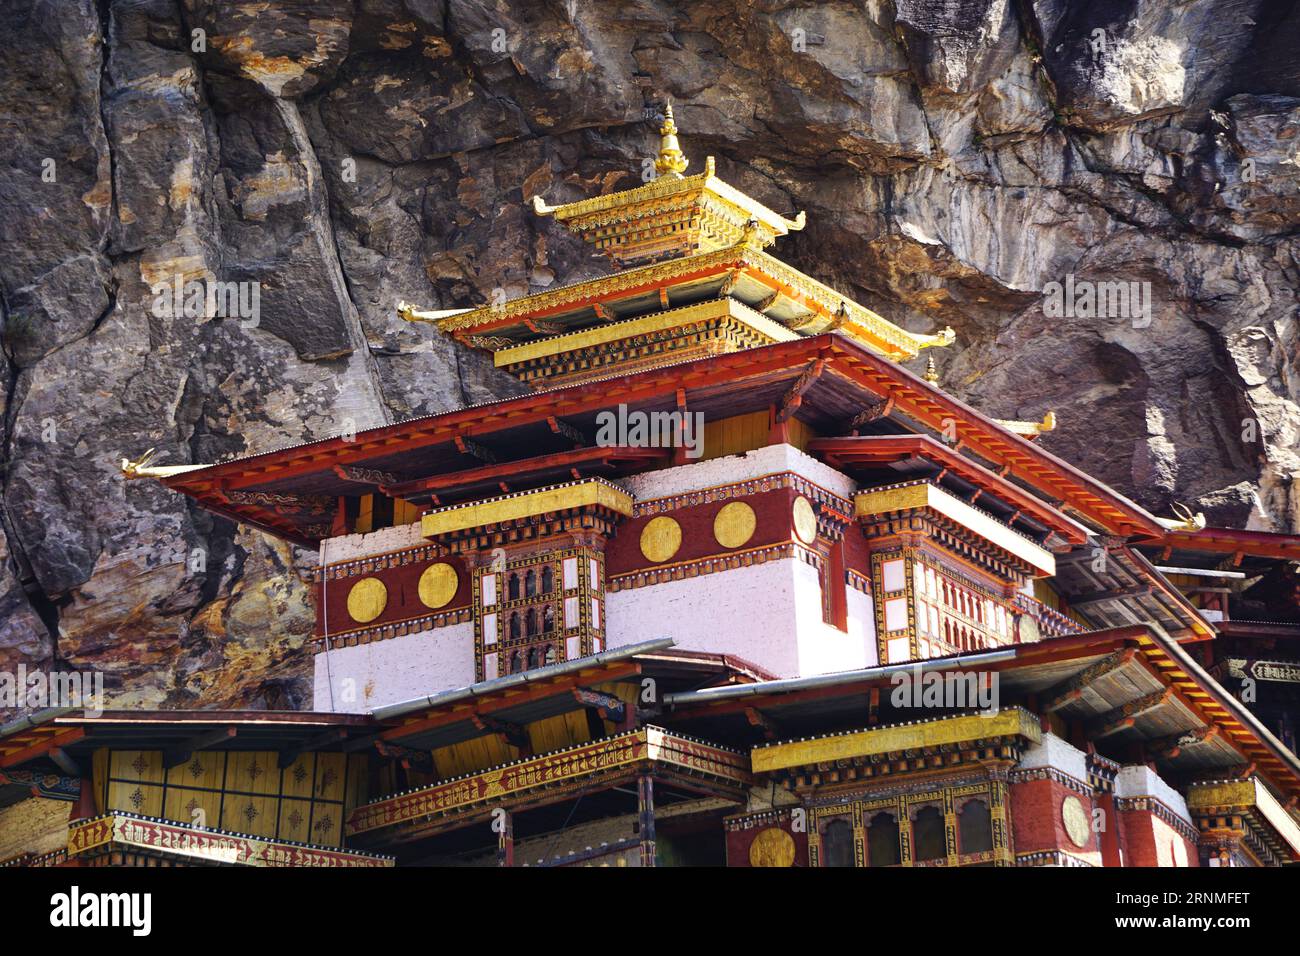 Closeup detail of the Tiger's Nest Monastery showing its gilded square pagoda rooftop and traditional intricately painted woodwork, near Paro, Bhutan Stock Photo